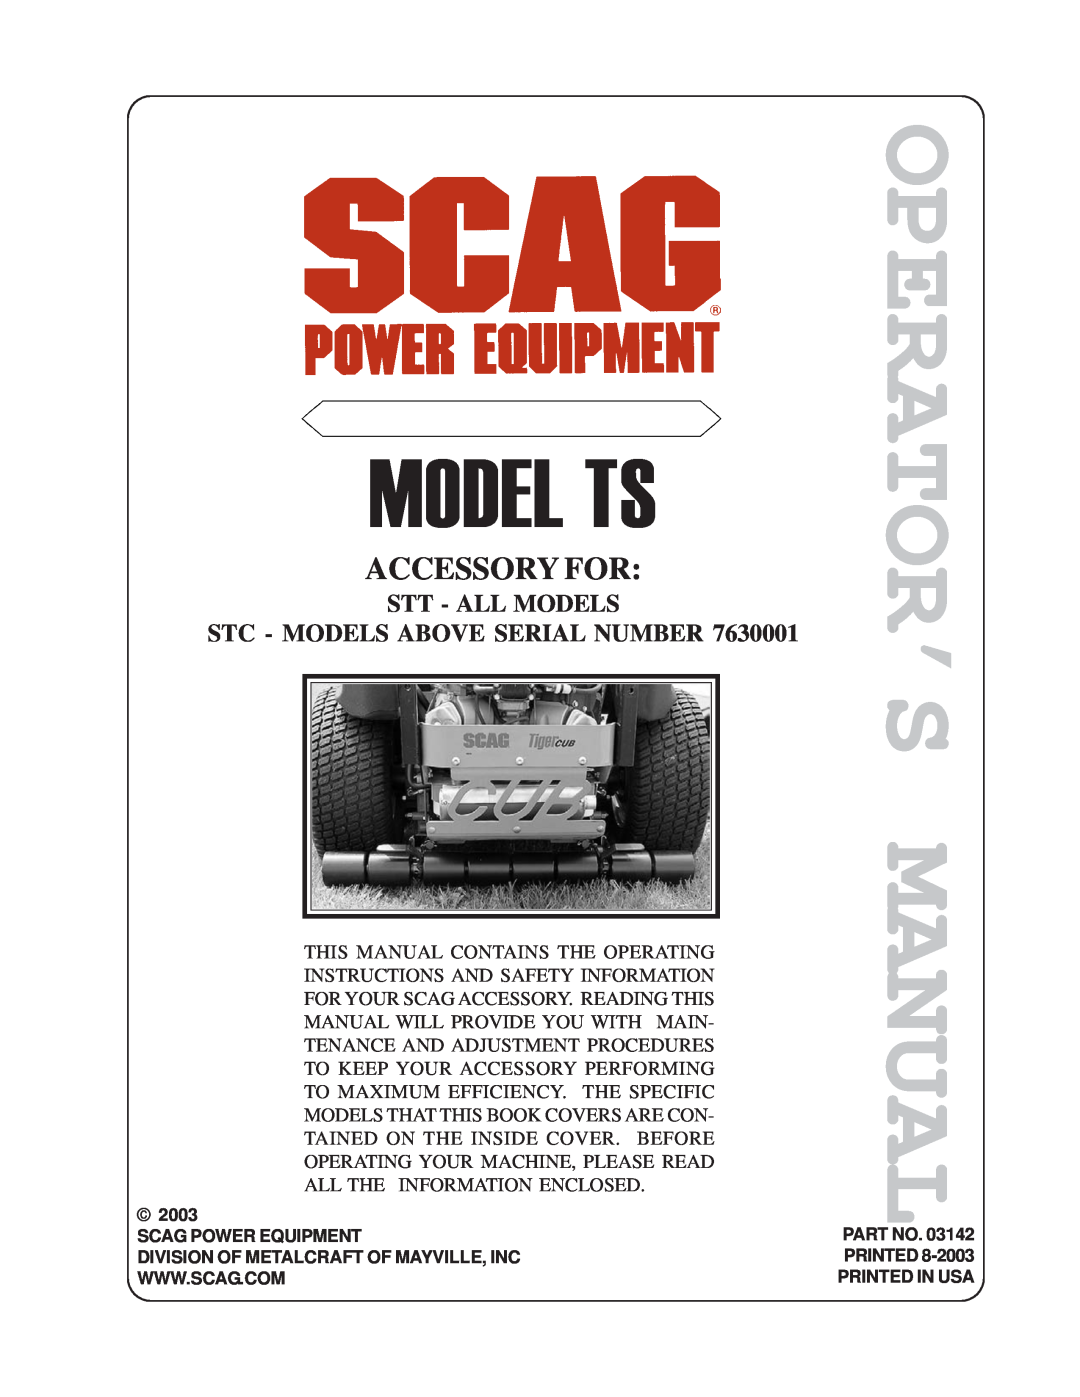 Scag Power Equipment 7630001 manual Operator’S Manual, Model Ts, Accessory For 